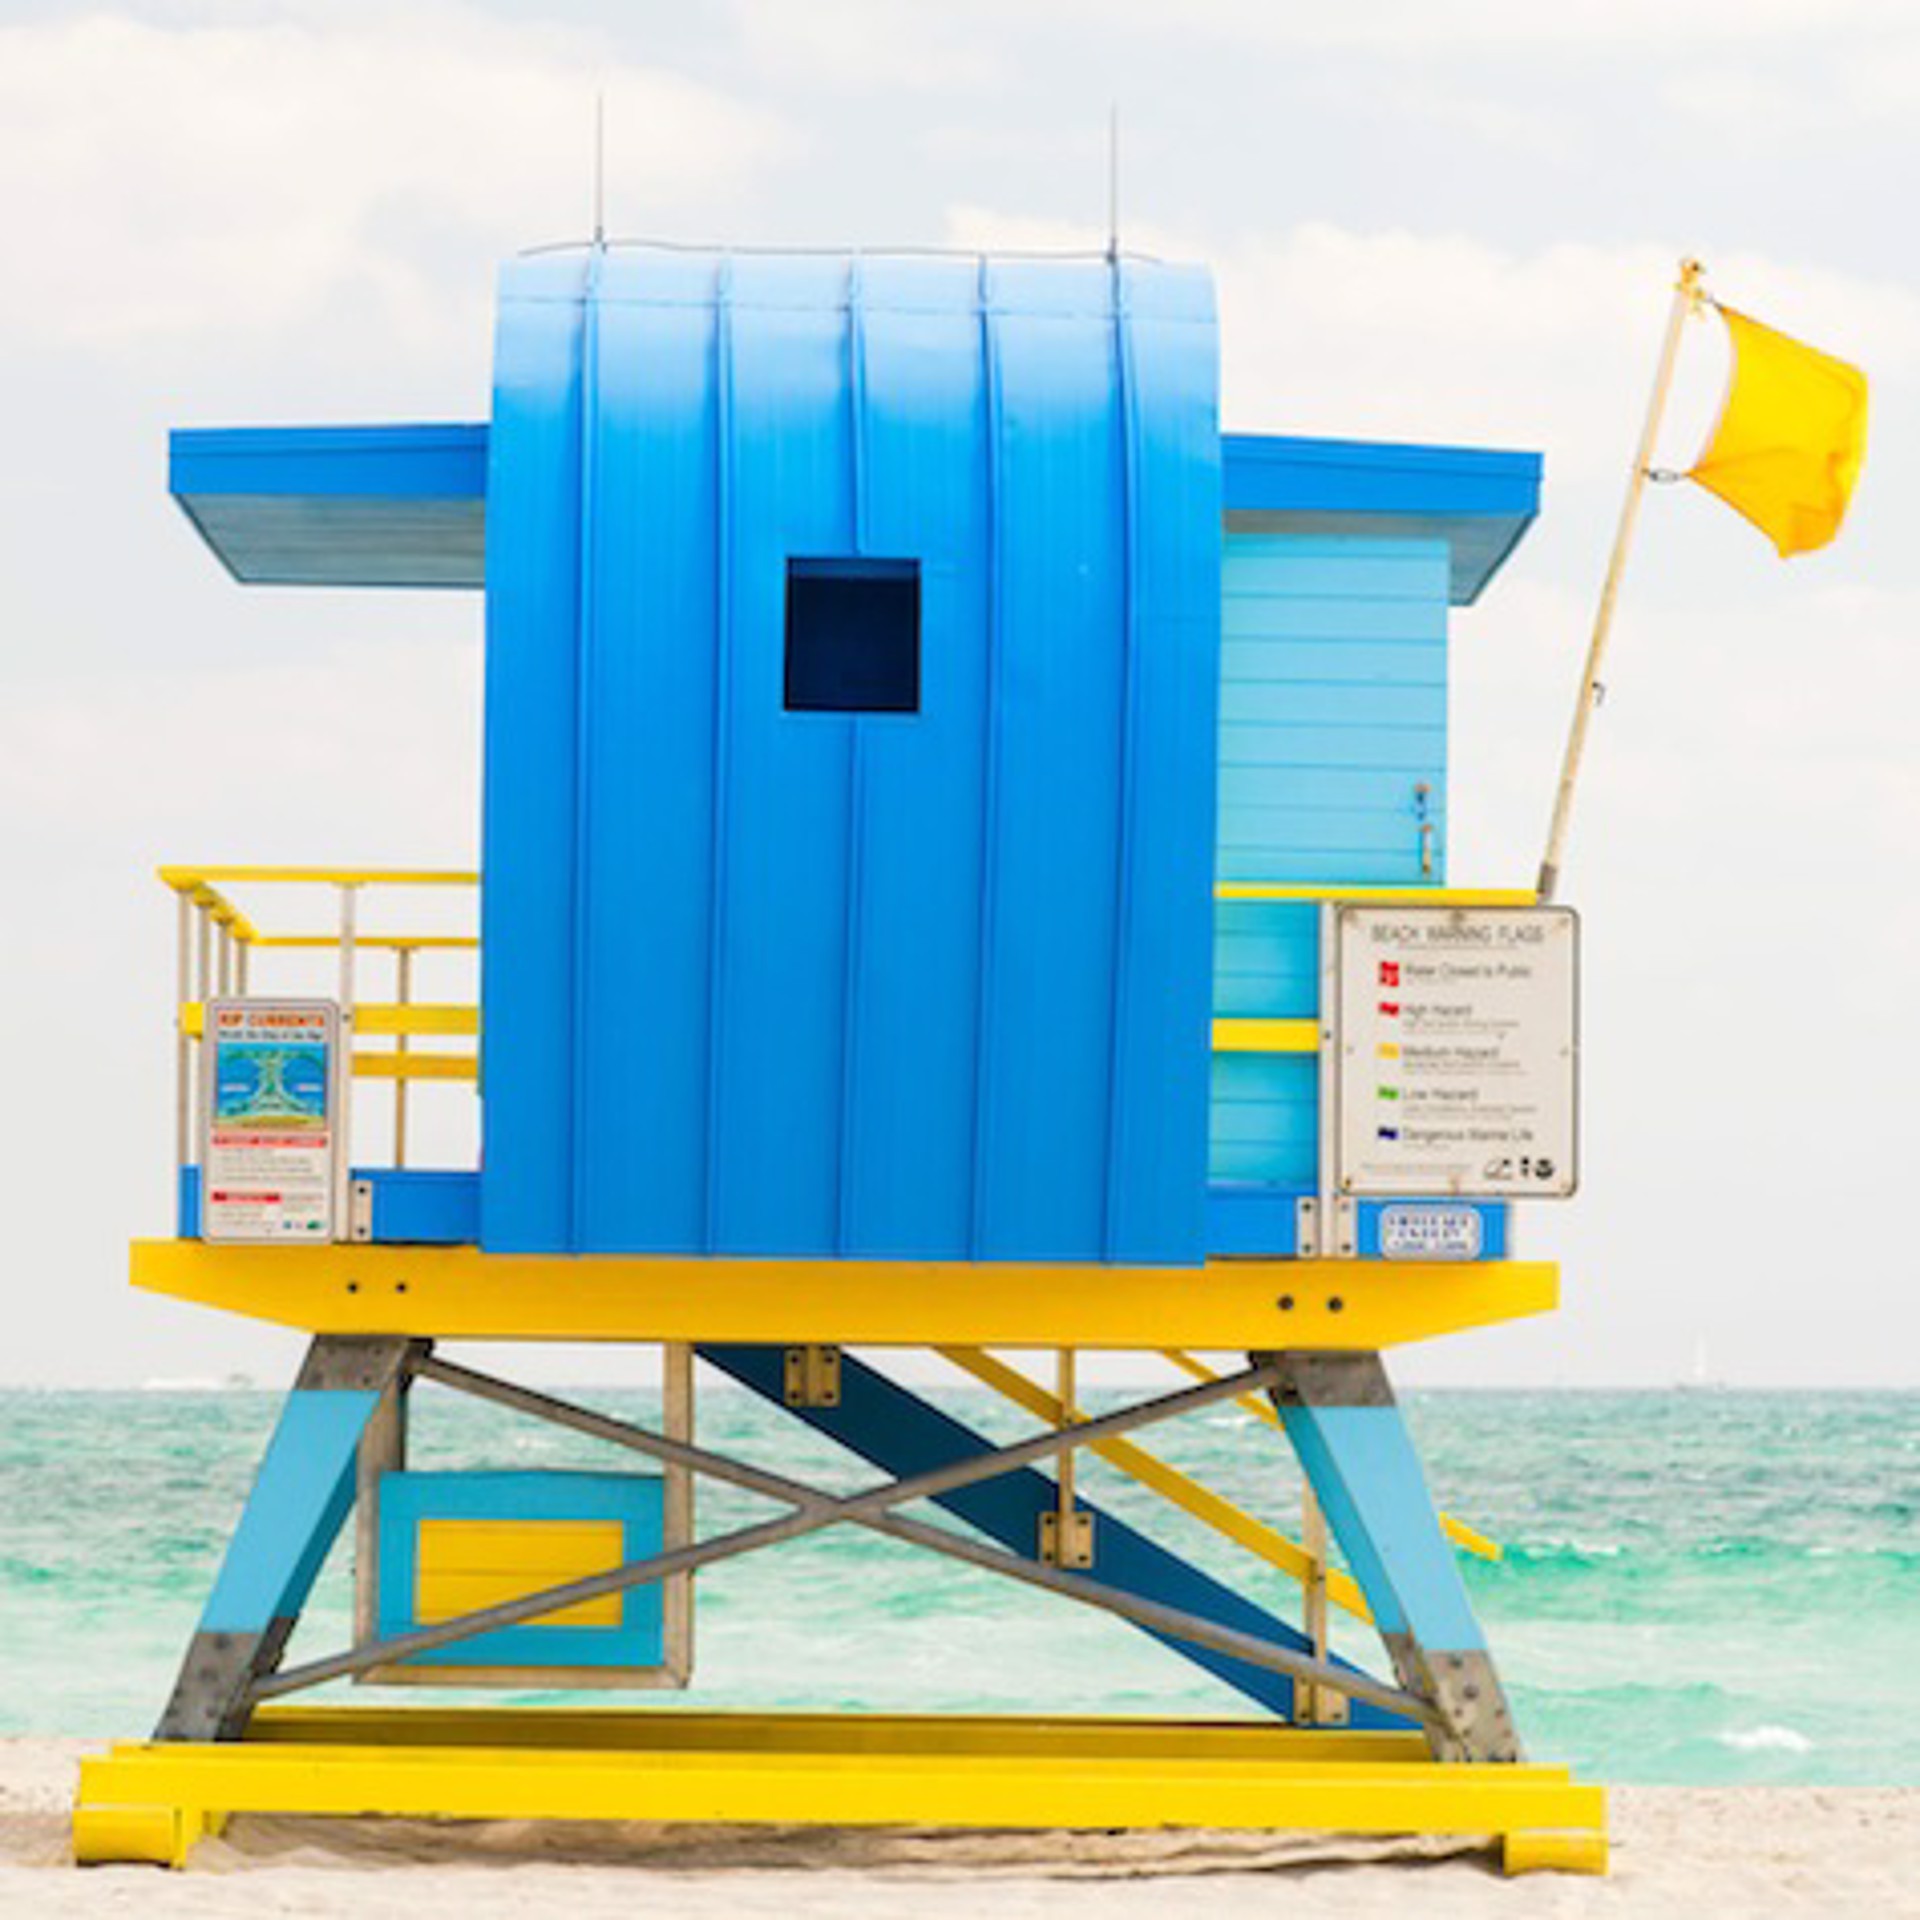 South Pointe Miami Lifeguard Stand, Rear View by Peter Mendelson